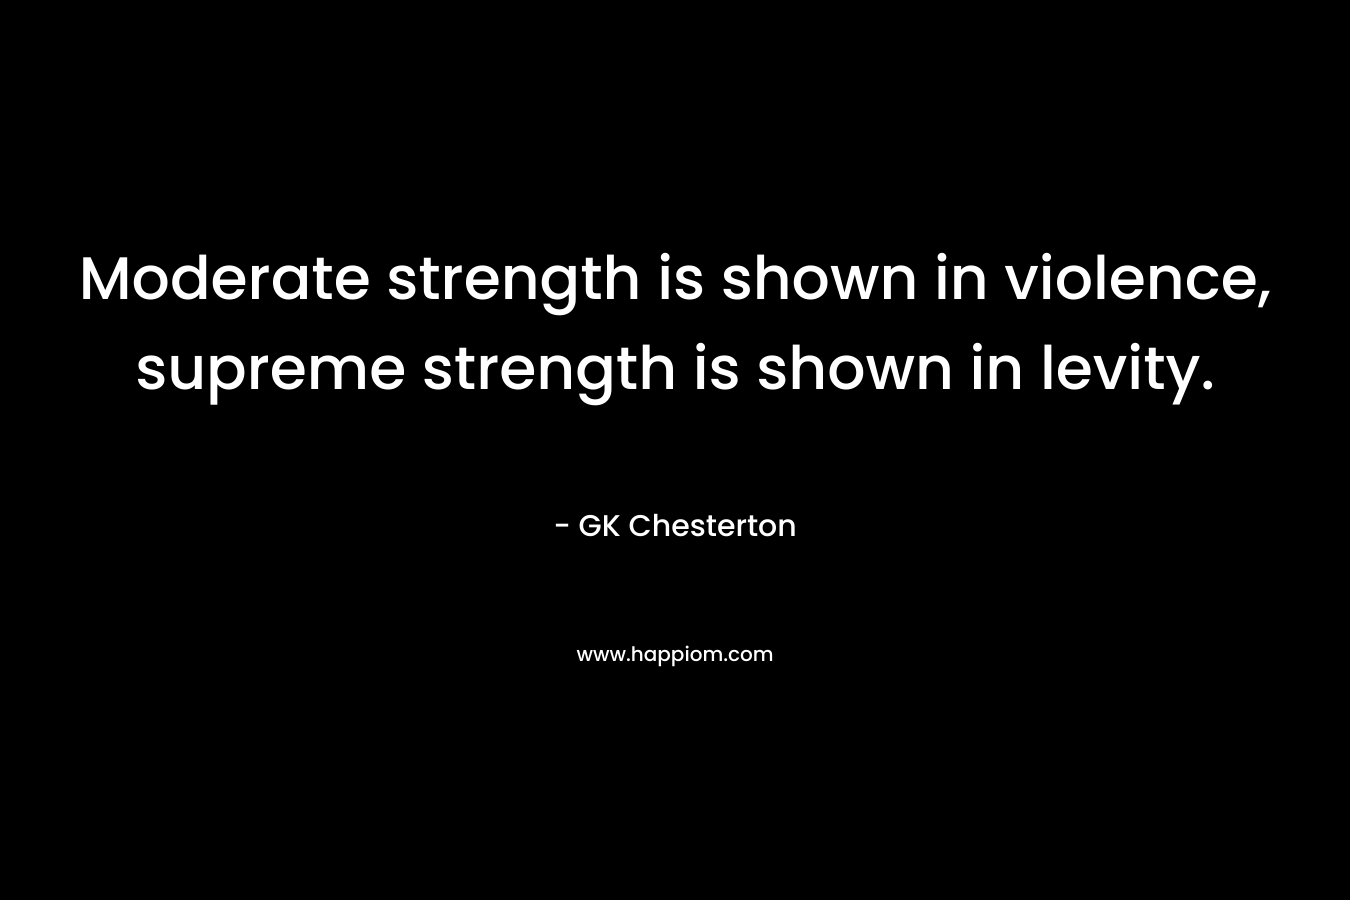 Moderate strength is shown in violence, supreme strength is shown in levity.